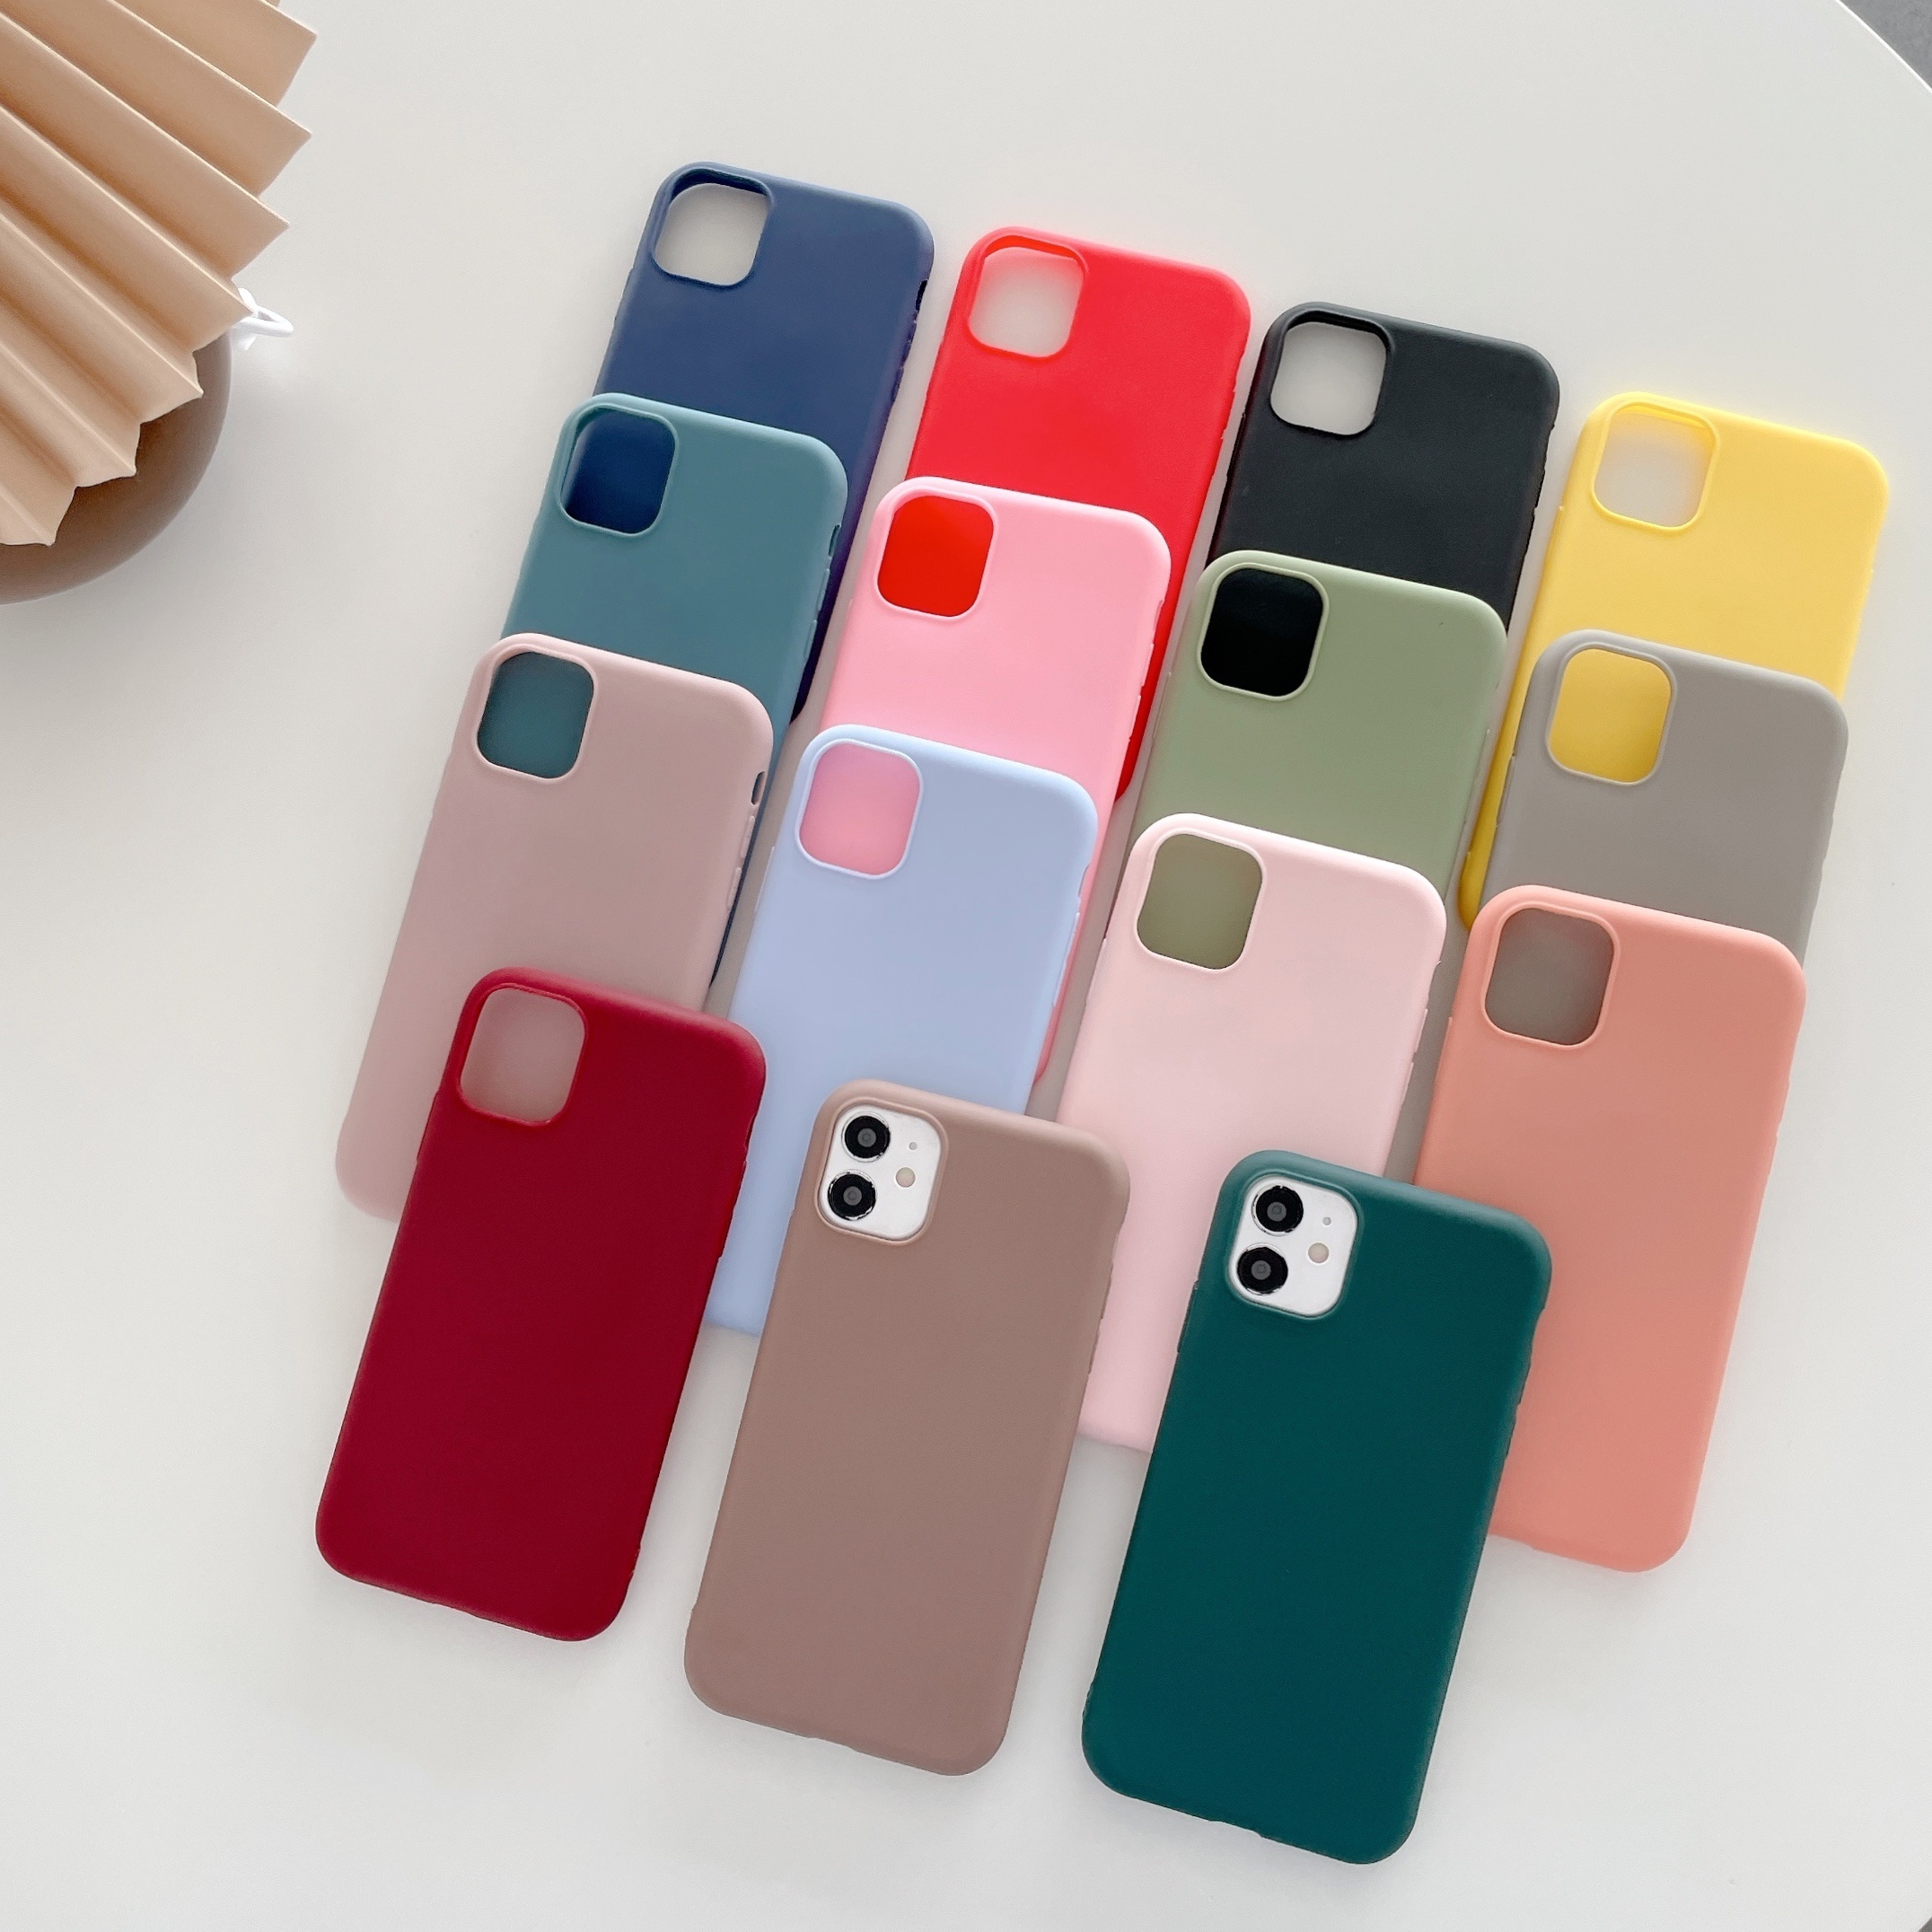 Ultra-thin Candy Color Case for iPhone 6 6S Plus Silicone TPU Soft